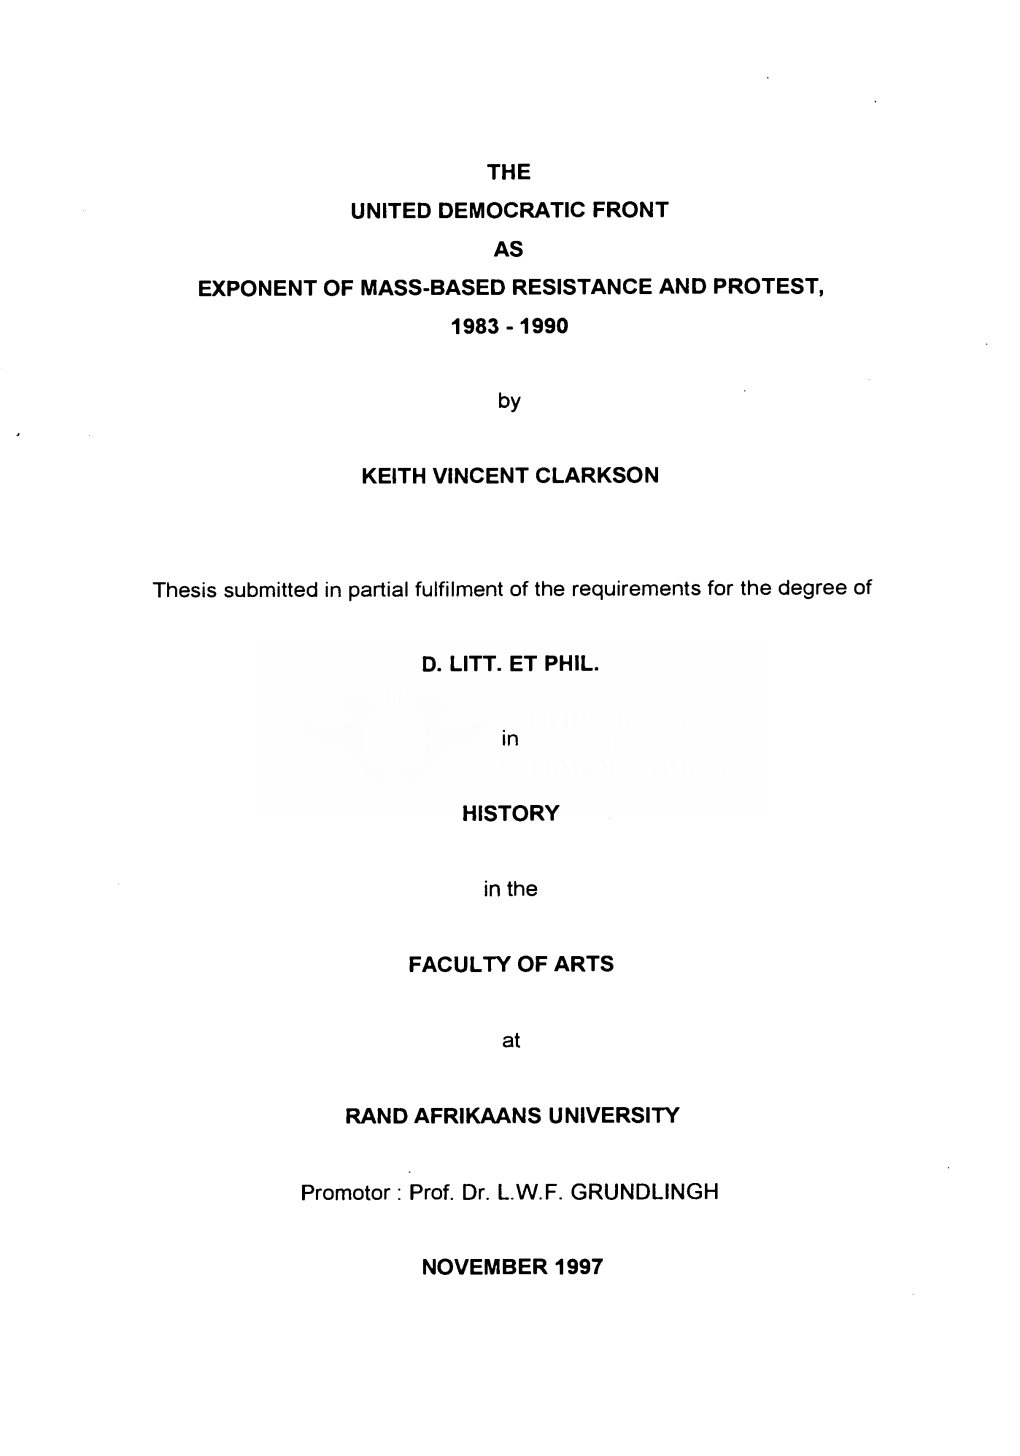 The United Democratic Front As Exponent of Mass-Based Resistance and Protest, 1983 - 1990